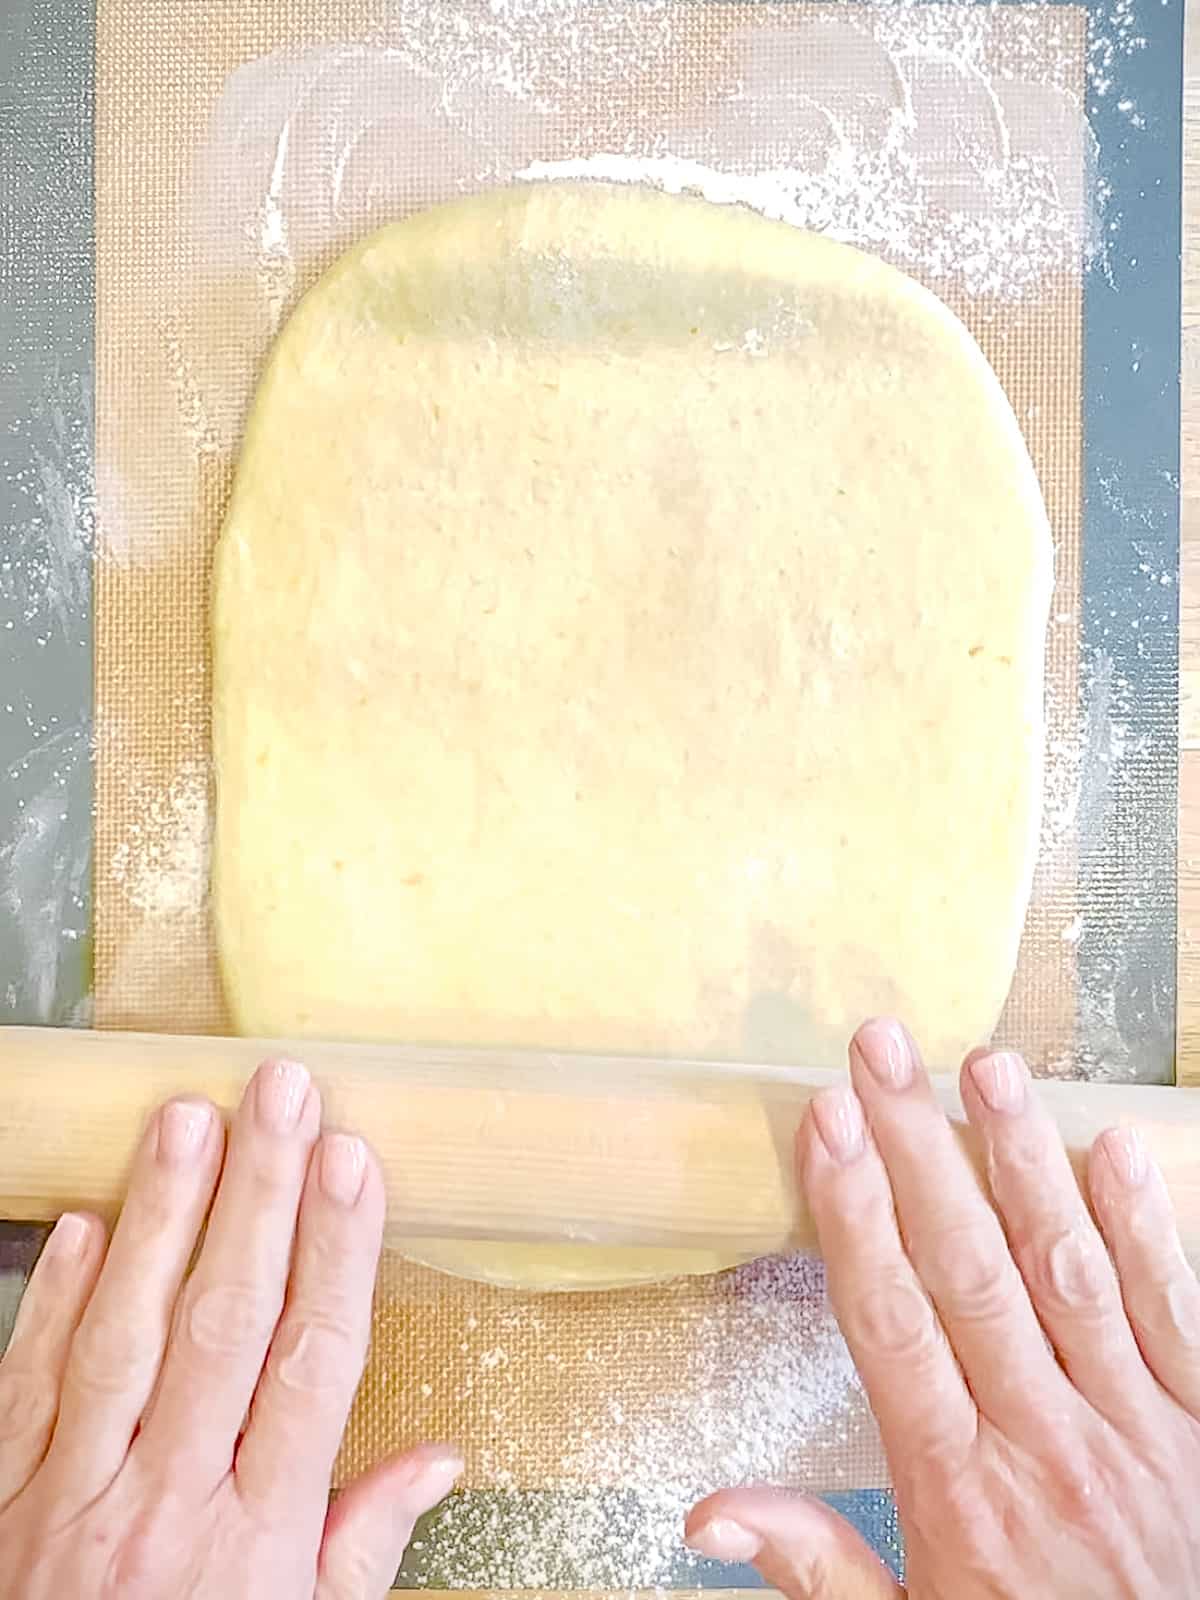 Rolling out cinnamon roll dough